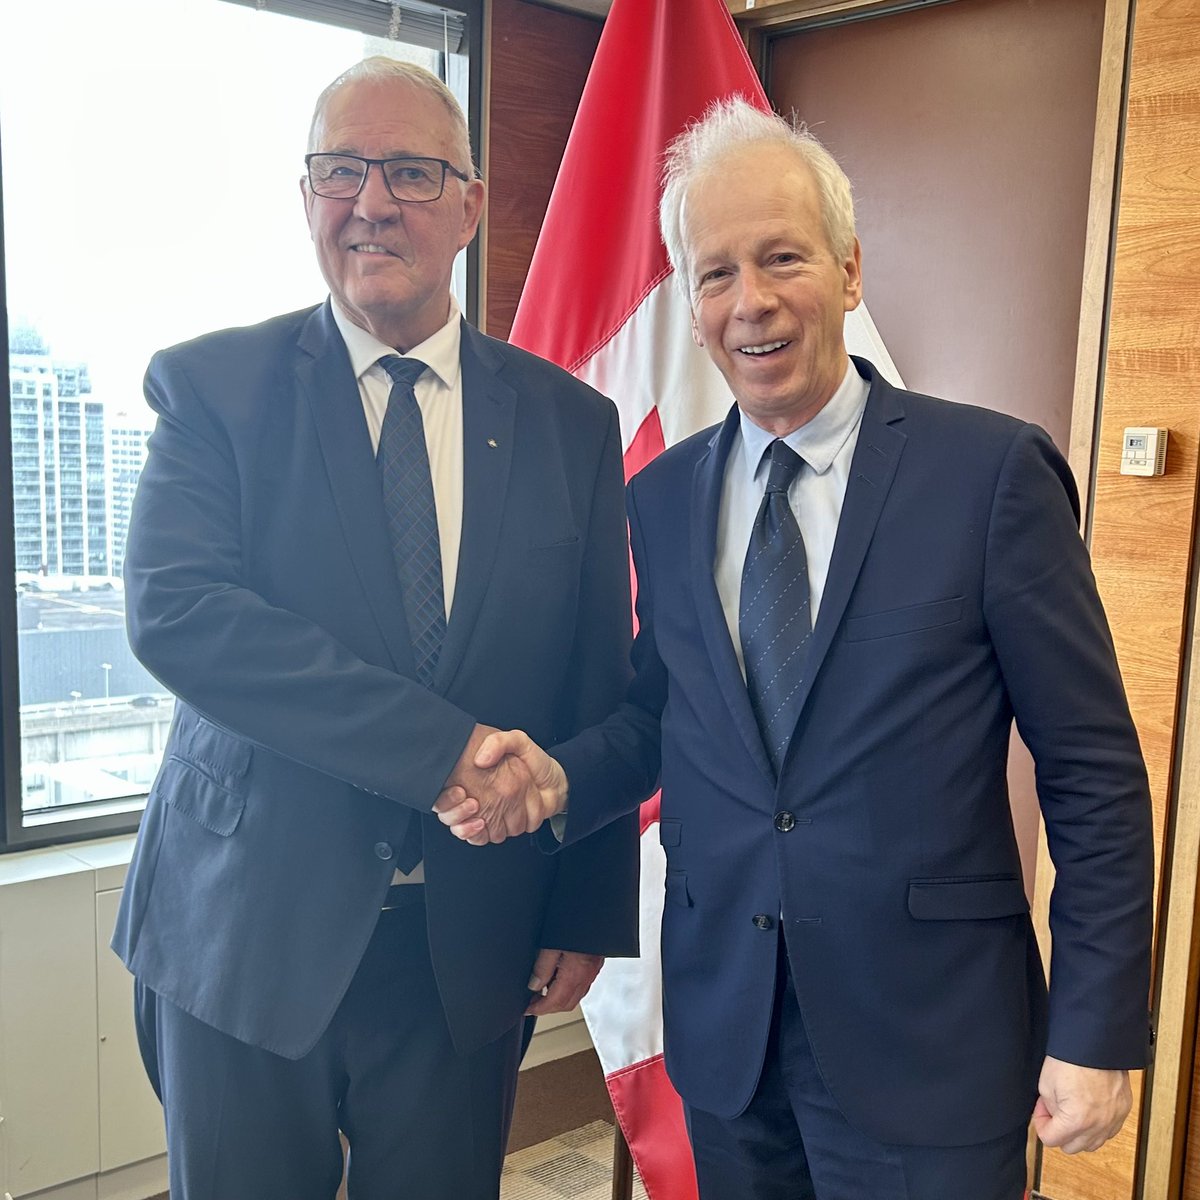 Today, I met with @AmbStephaneDion to discuss Our North, Strong and Free: A Renewed Vision for Canada’s Defence. Through this policy update, we’re investing in our defence industry, supporting Ukraine for the long-term, and reaffirming Canada’s commitment to our @NATO Allies.